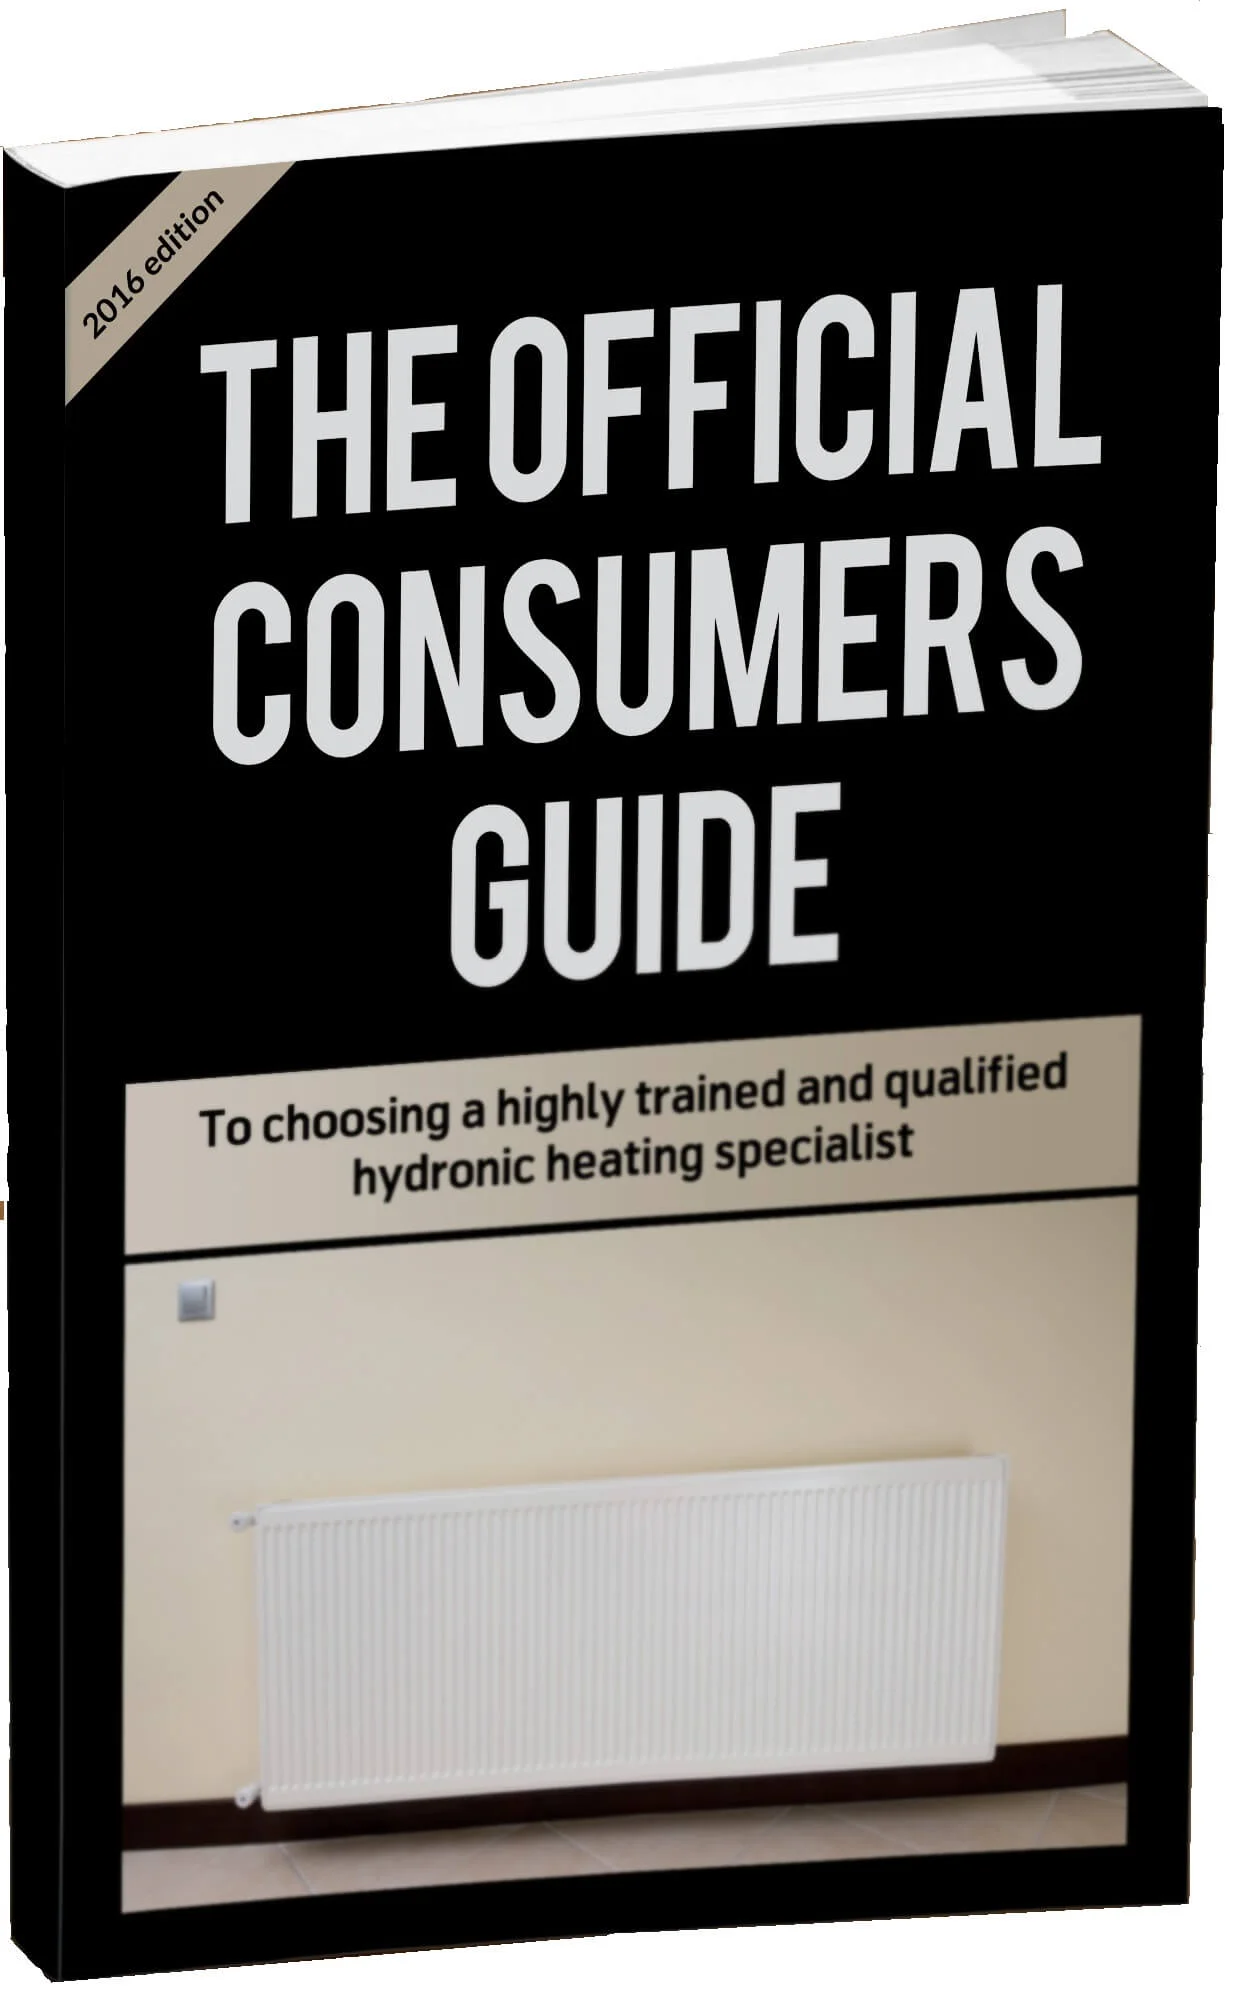 free eBook about hydronic heating